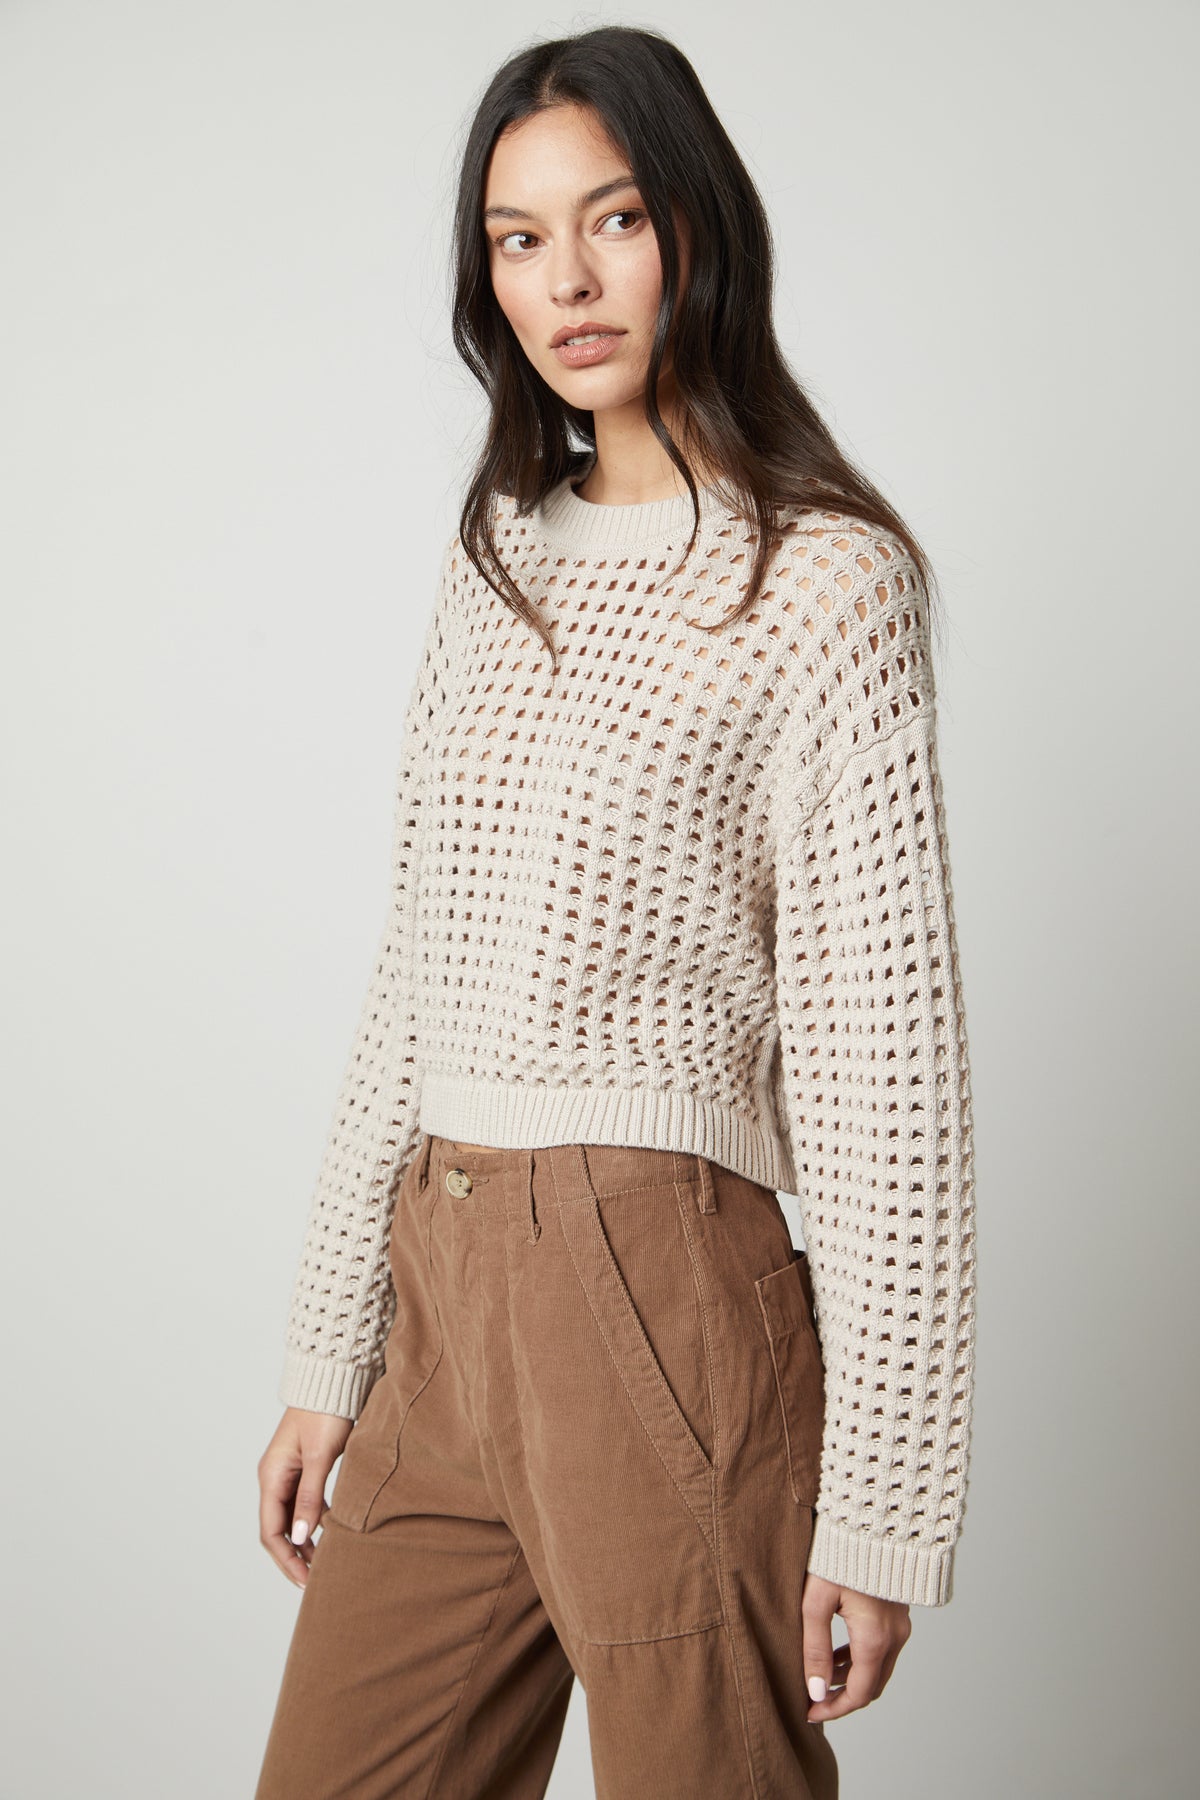   The model is wearing a SAMMIE MESH KNIT CREW NECK SWEATER by Velvet by Graham & Spencer and tan pants. 